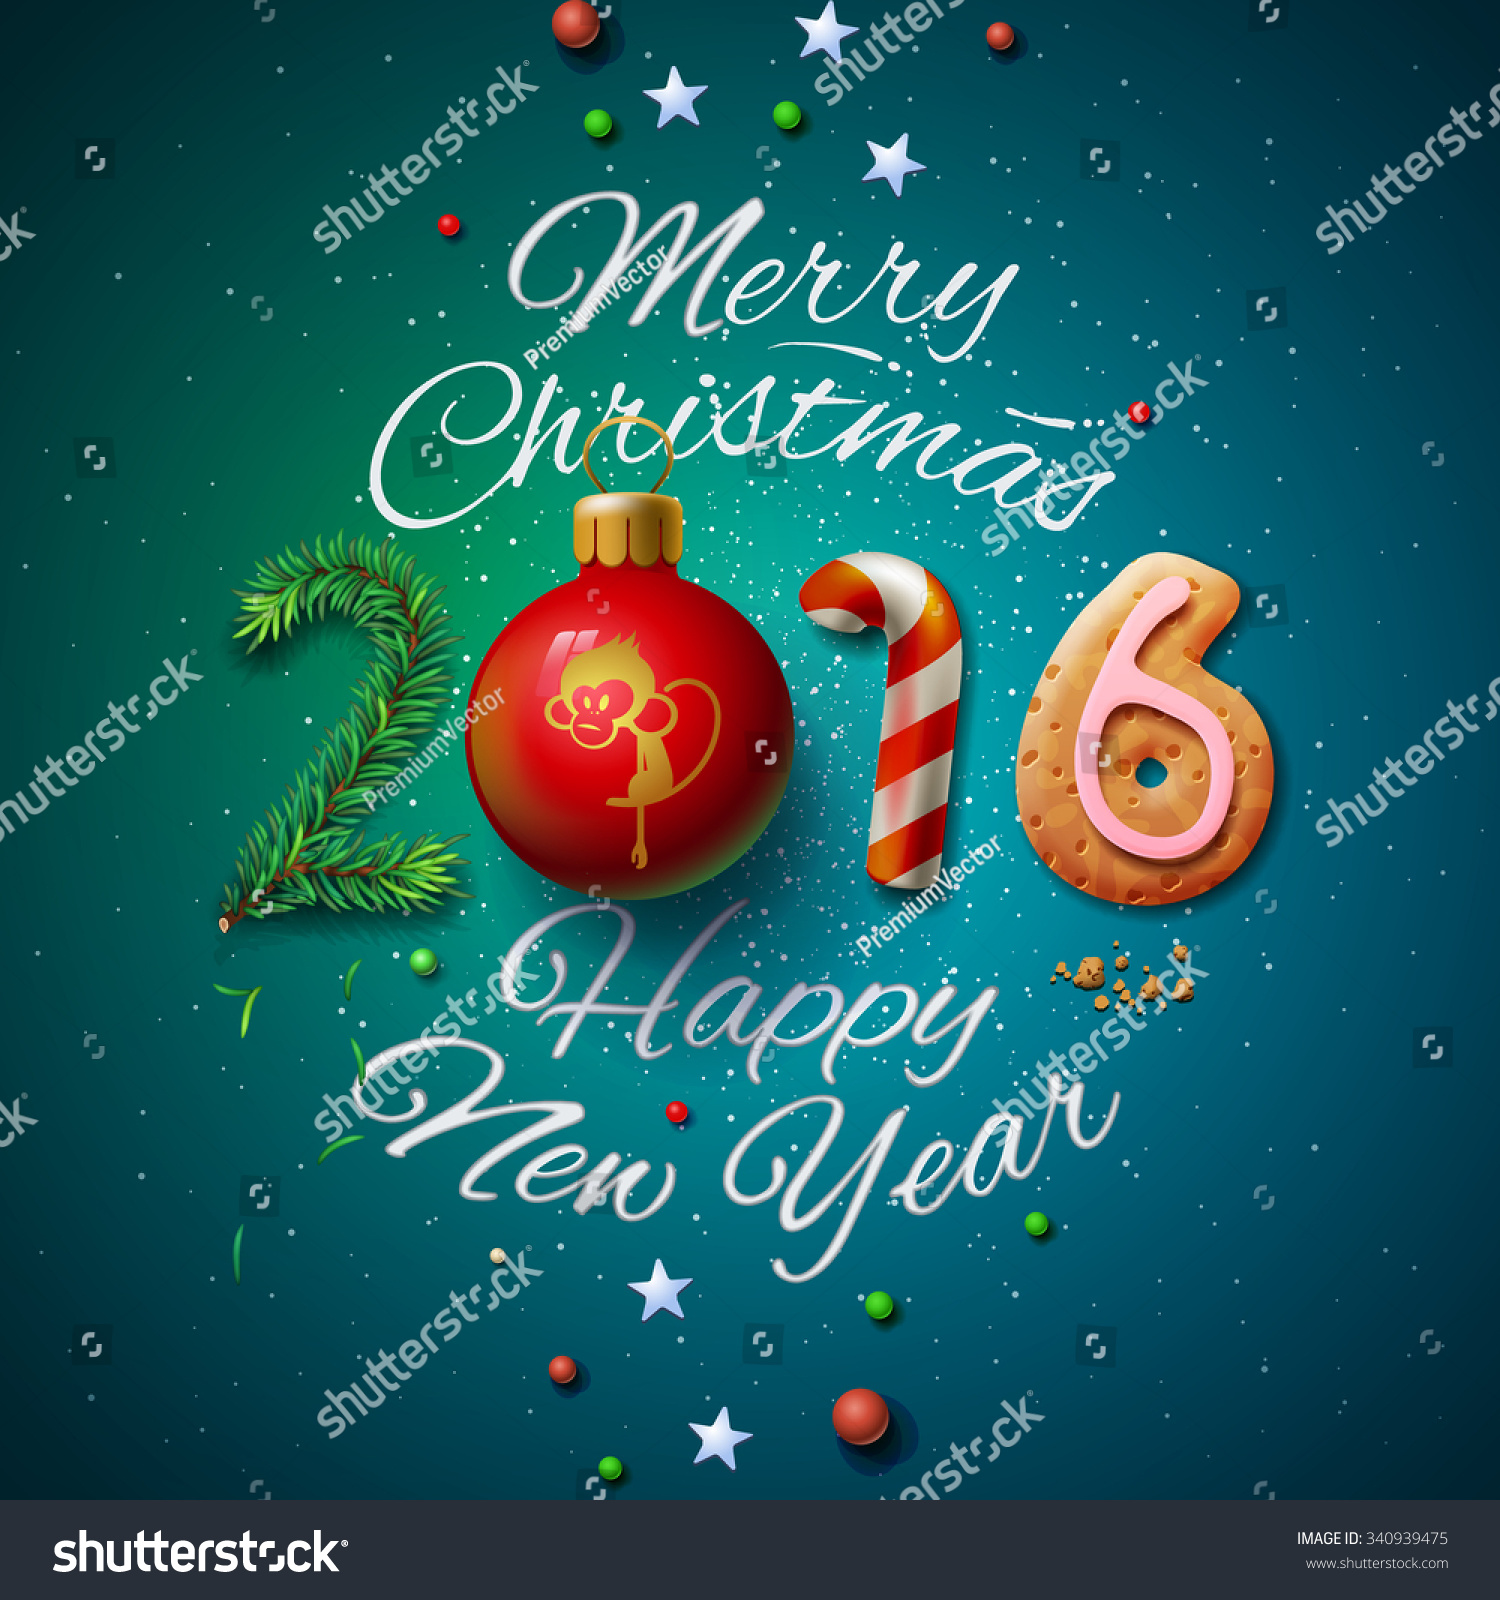 merry-christmas-and-happy-new-year-2016-greeting-card-vector